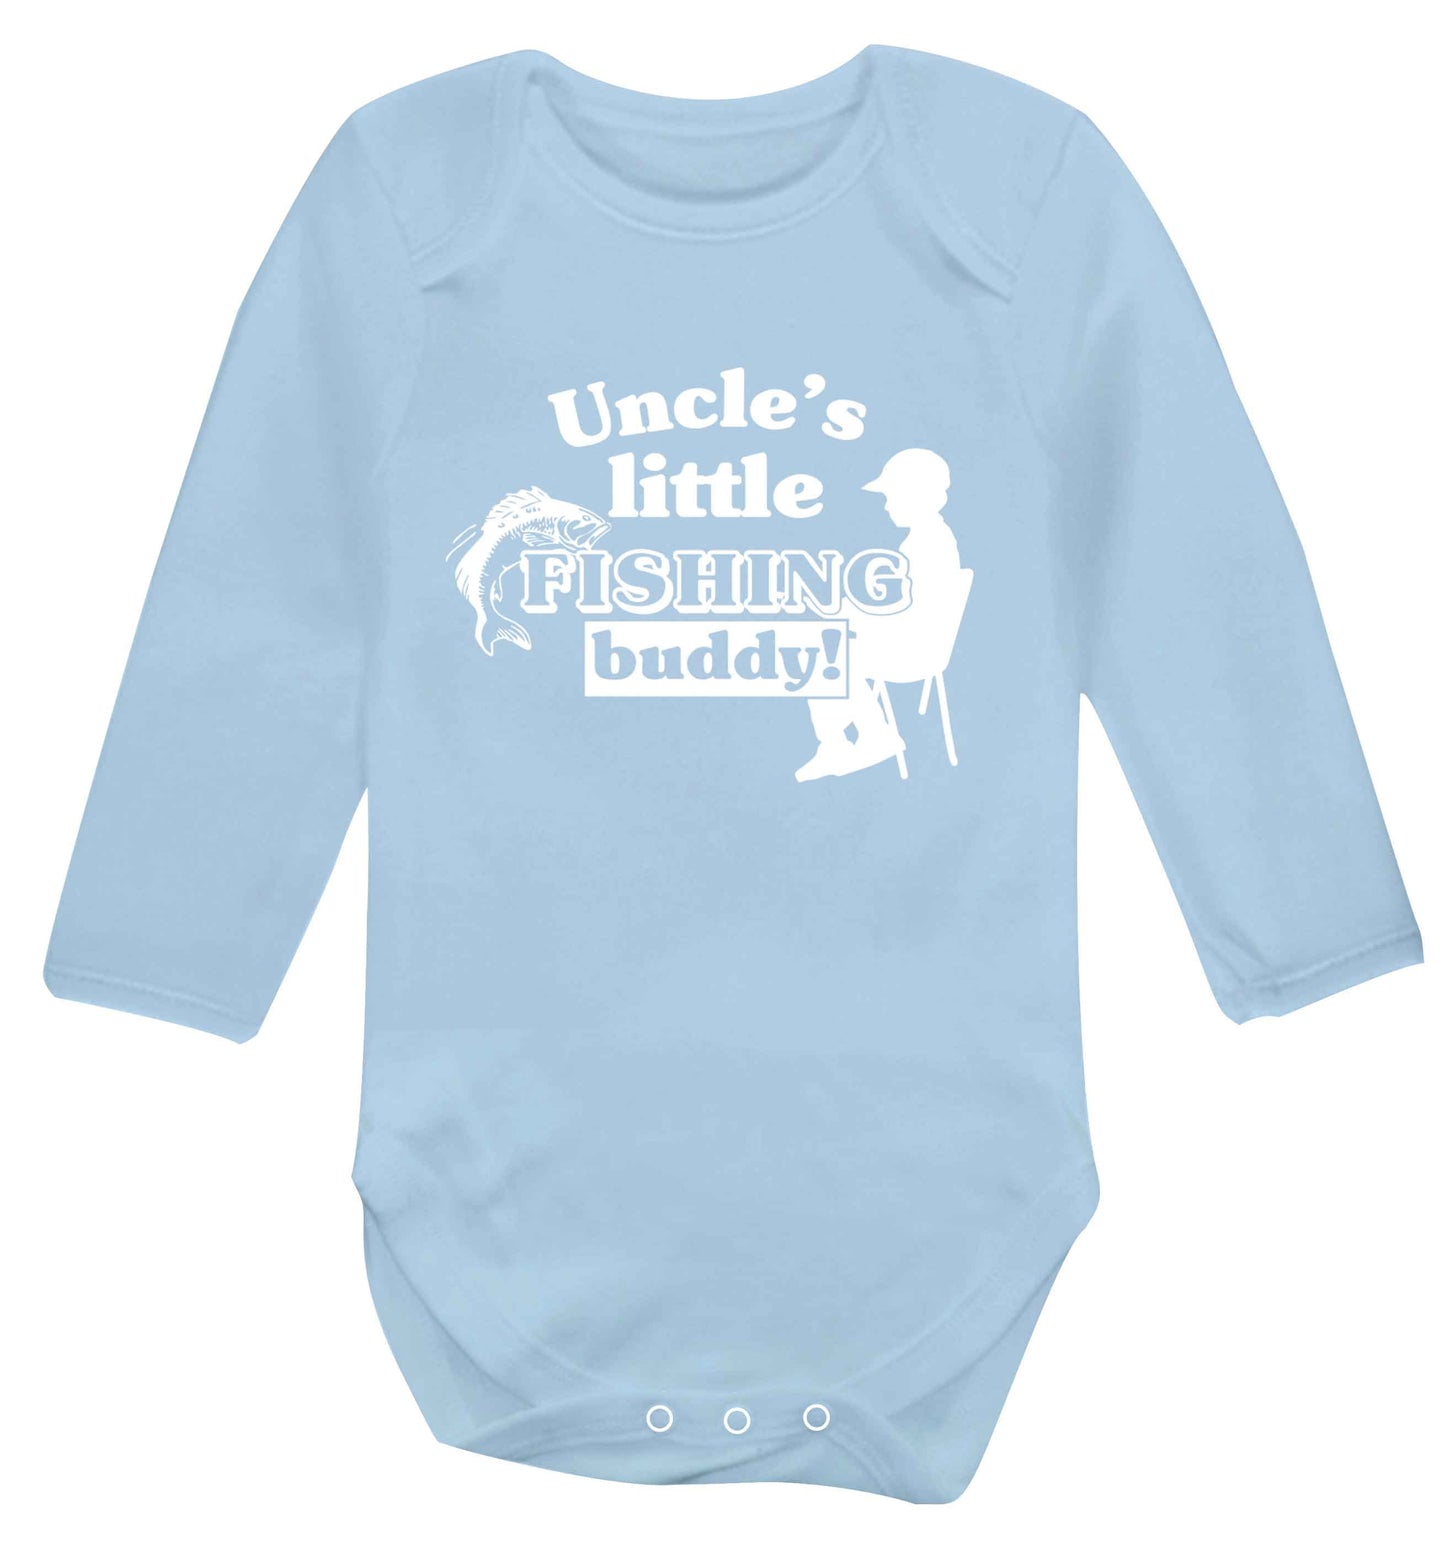 Uncle's little fishing buddy Baby Vest long sleeved pale blue 6-12 months